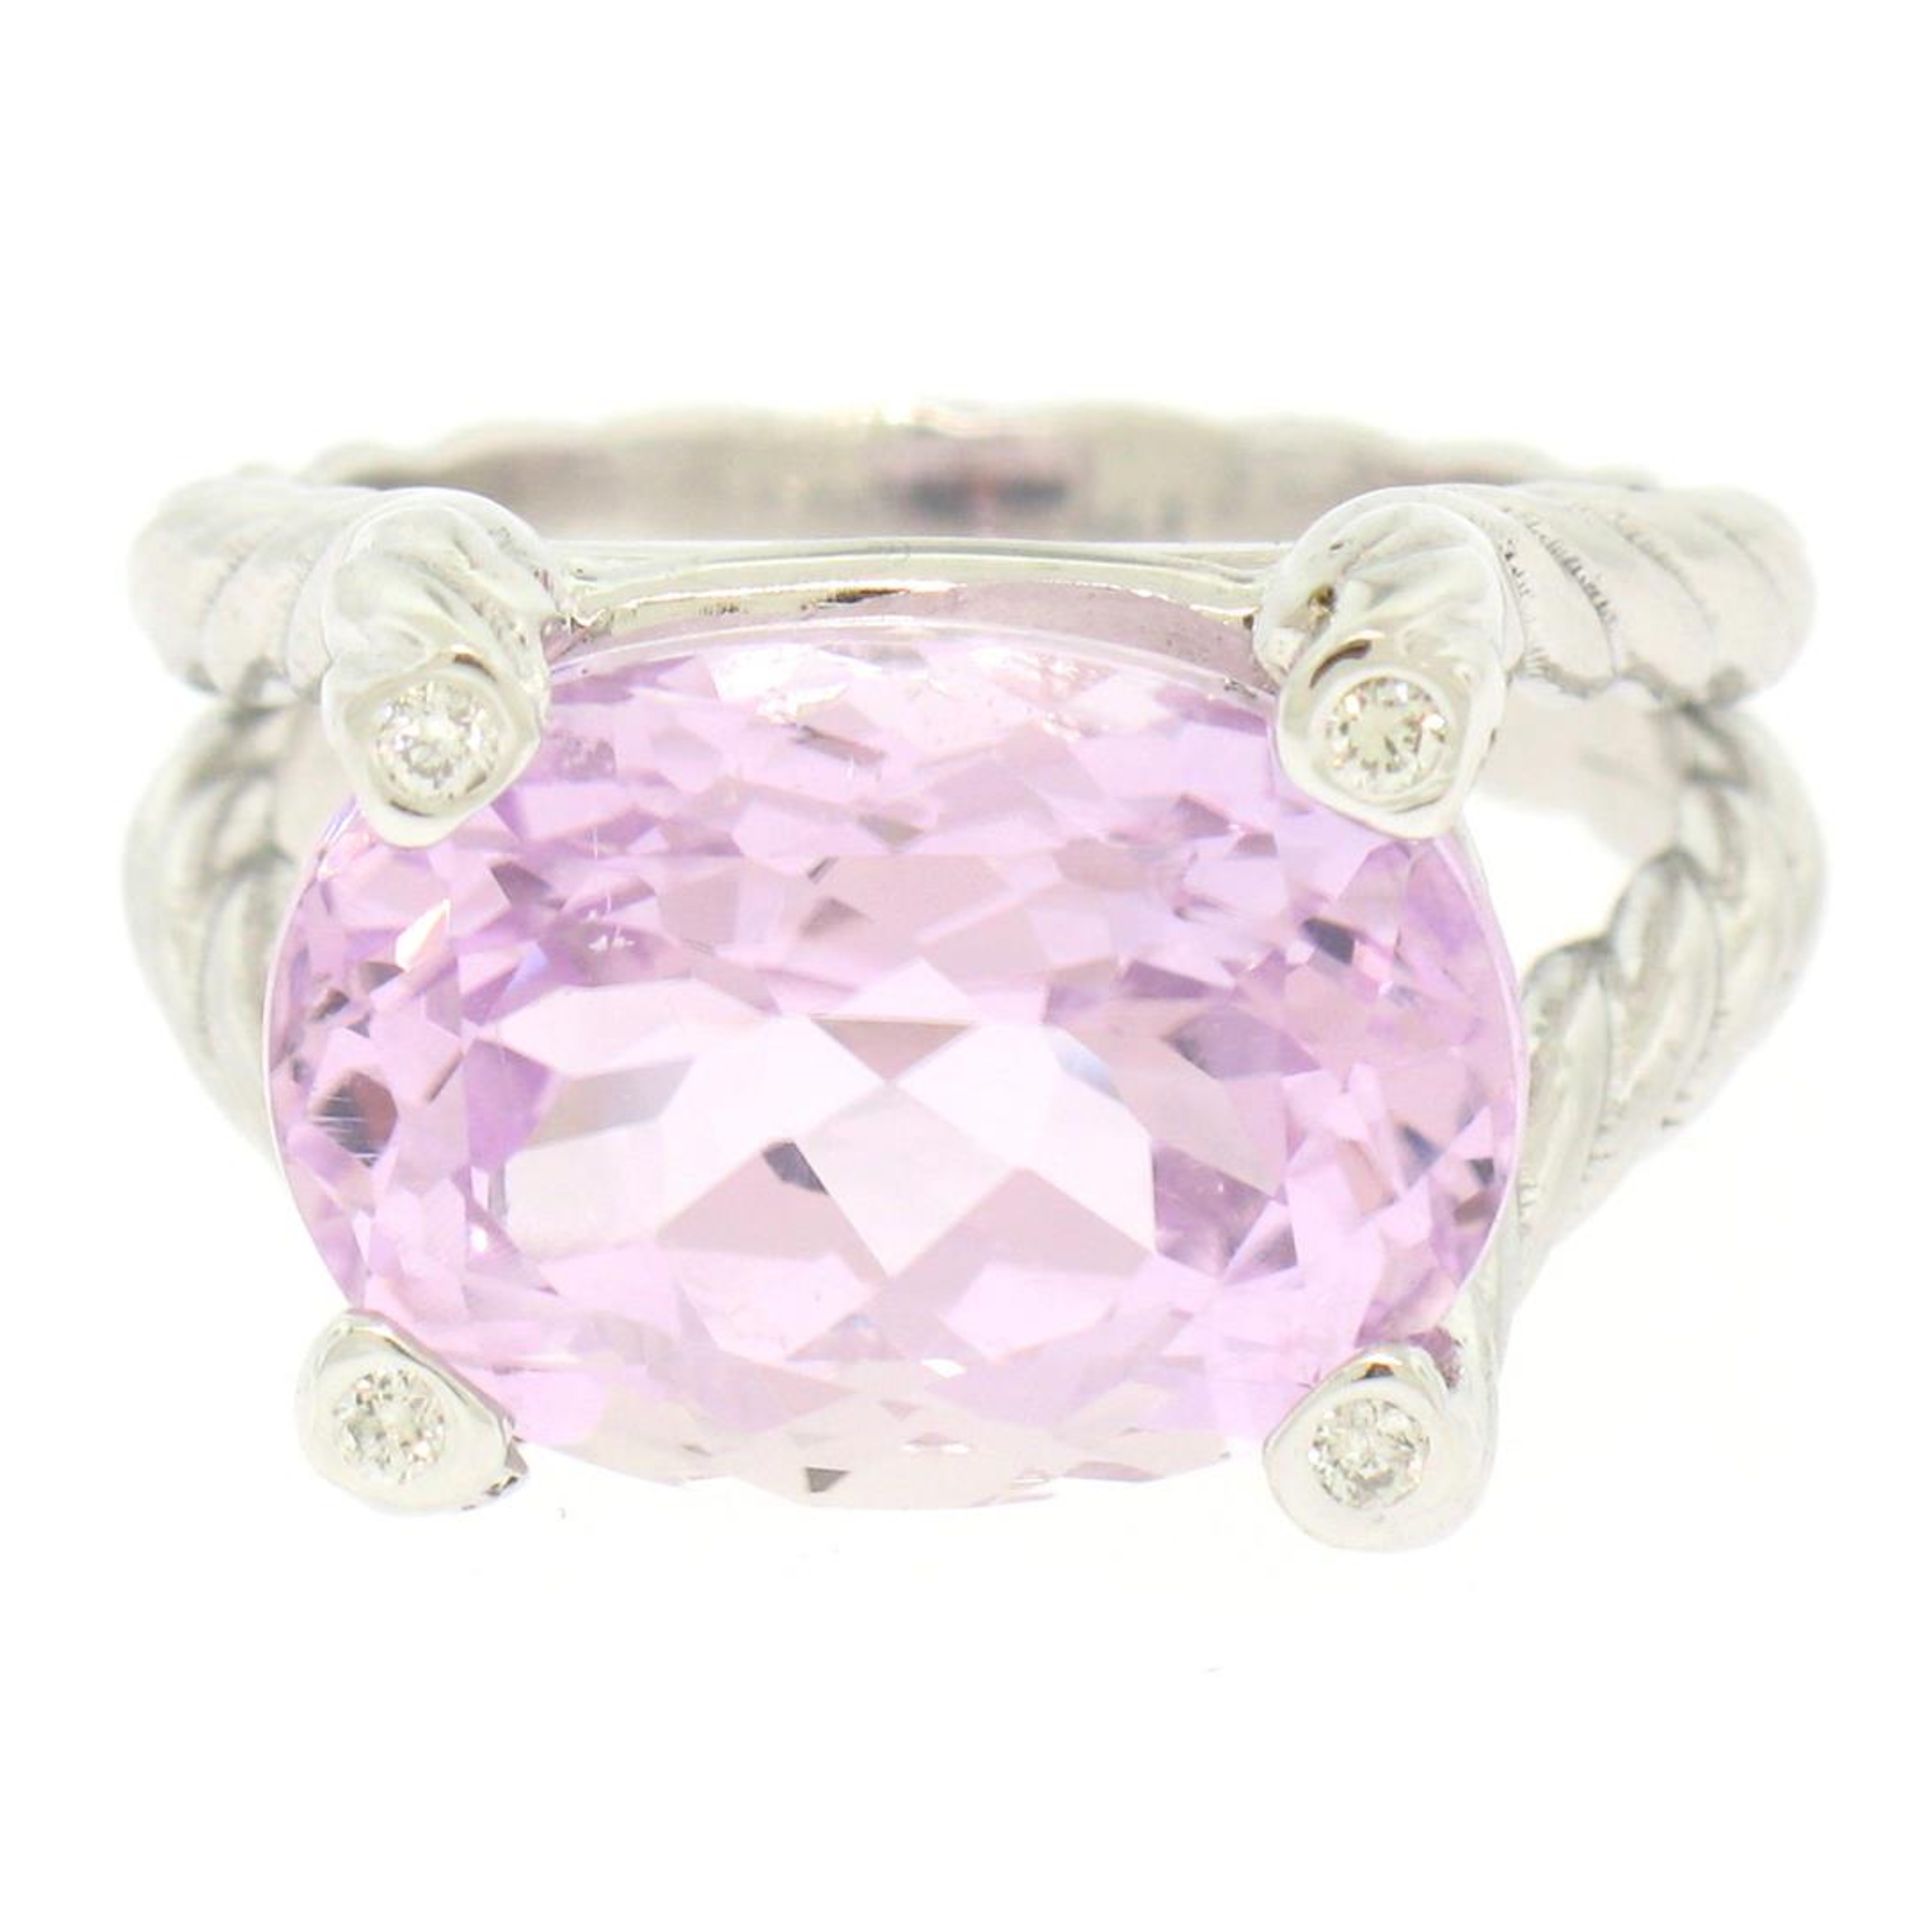 14k White Gold Twisted Cable 8.5 ct Oval Kunzite Solitaire Ring 4 Diamond Accent - Image 5 of 8